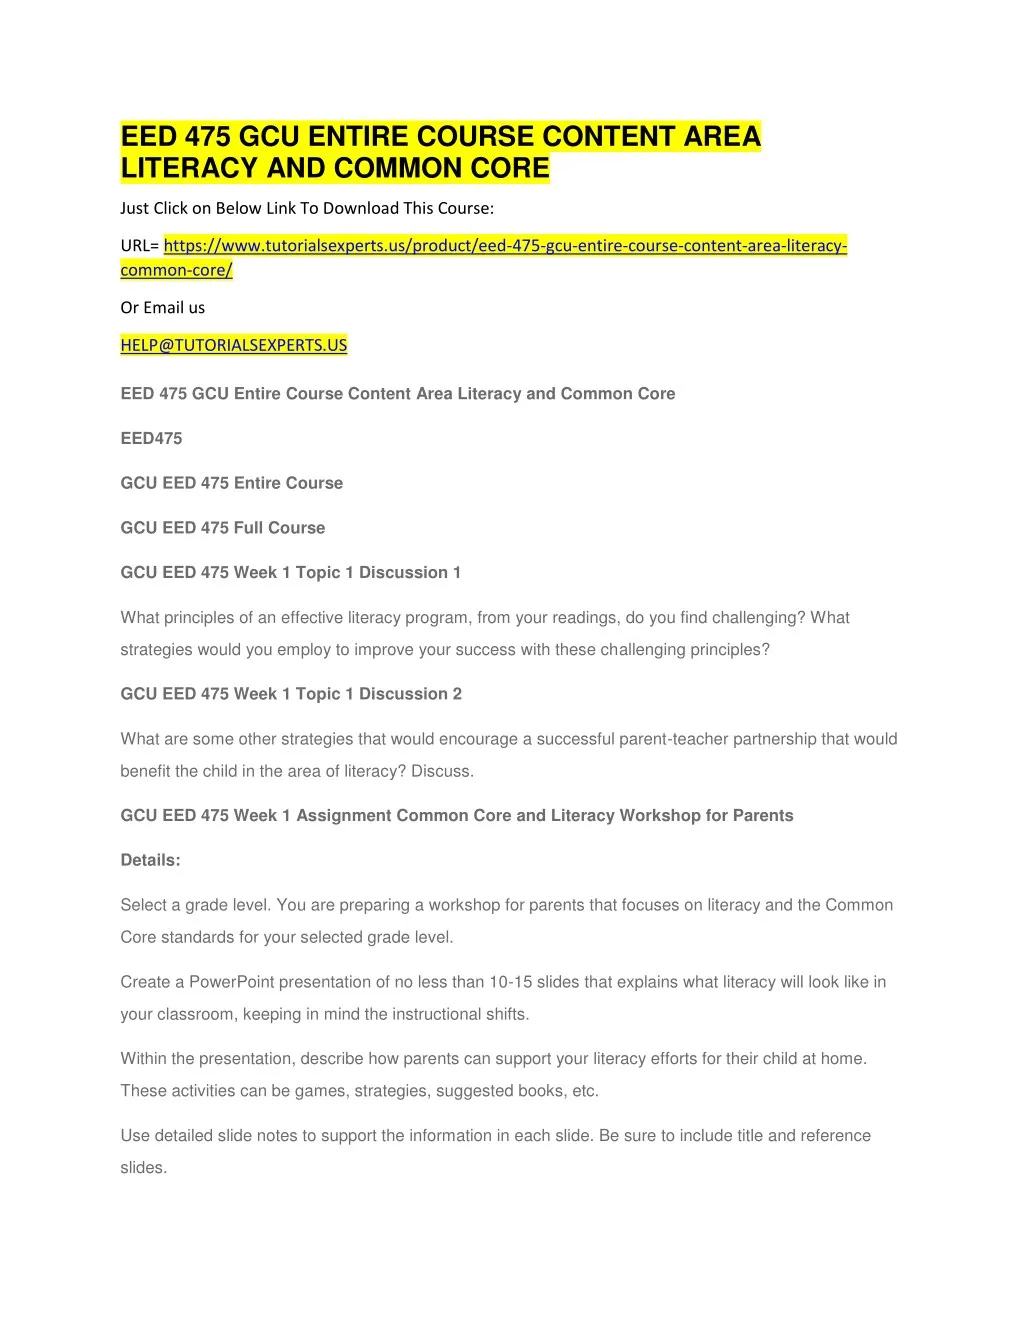 eed 475 gcu entire course content area literacy